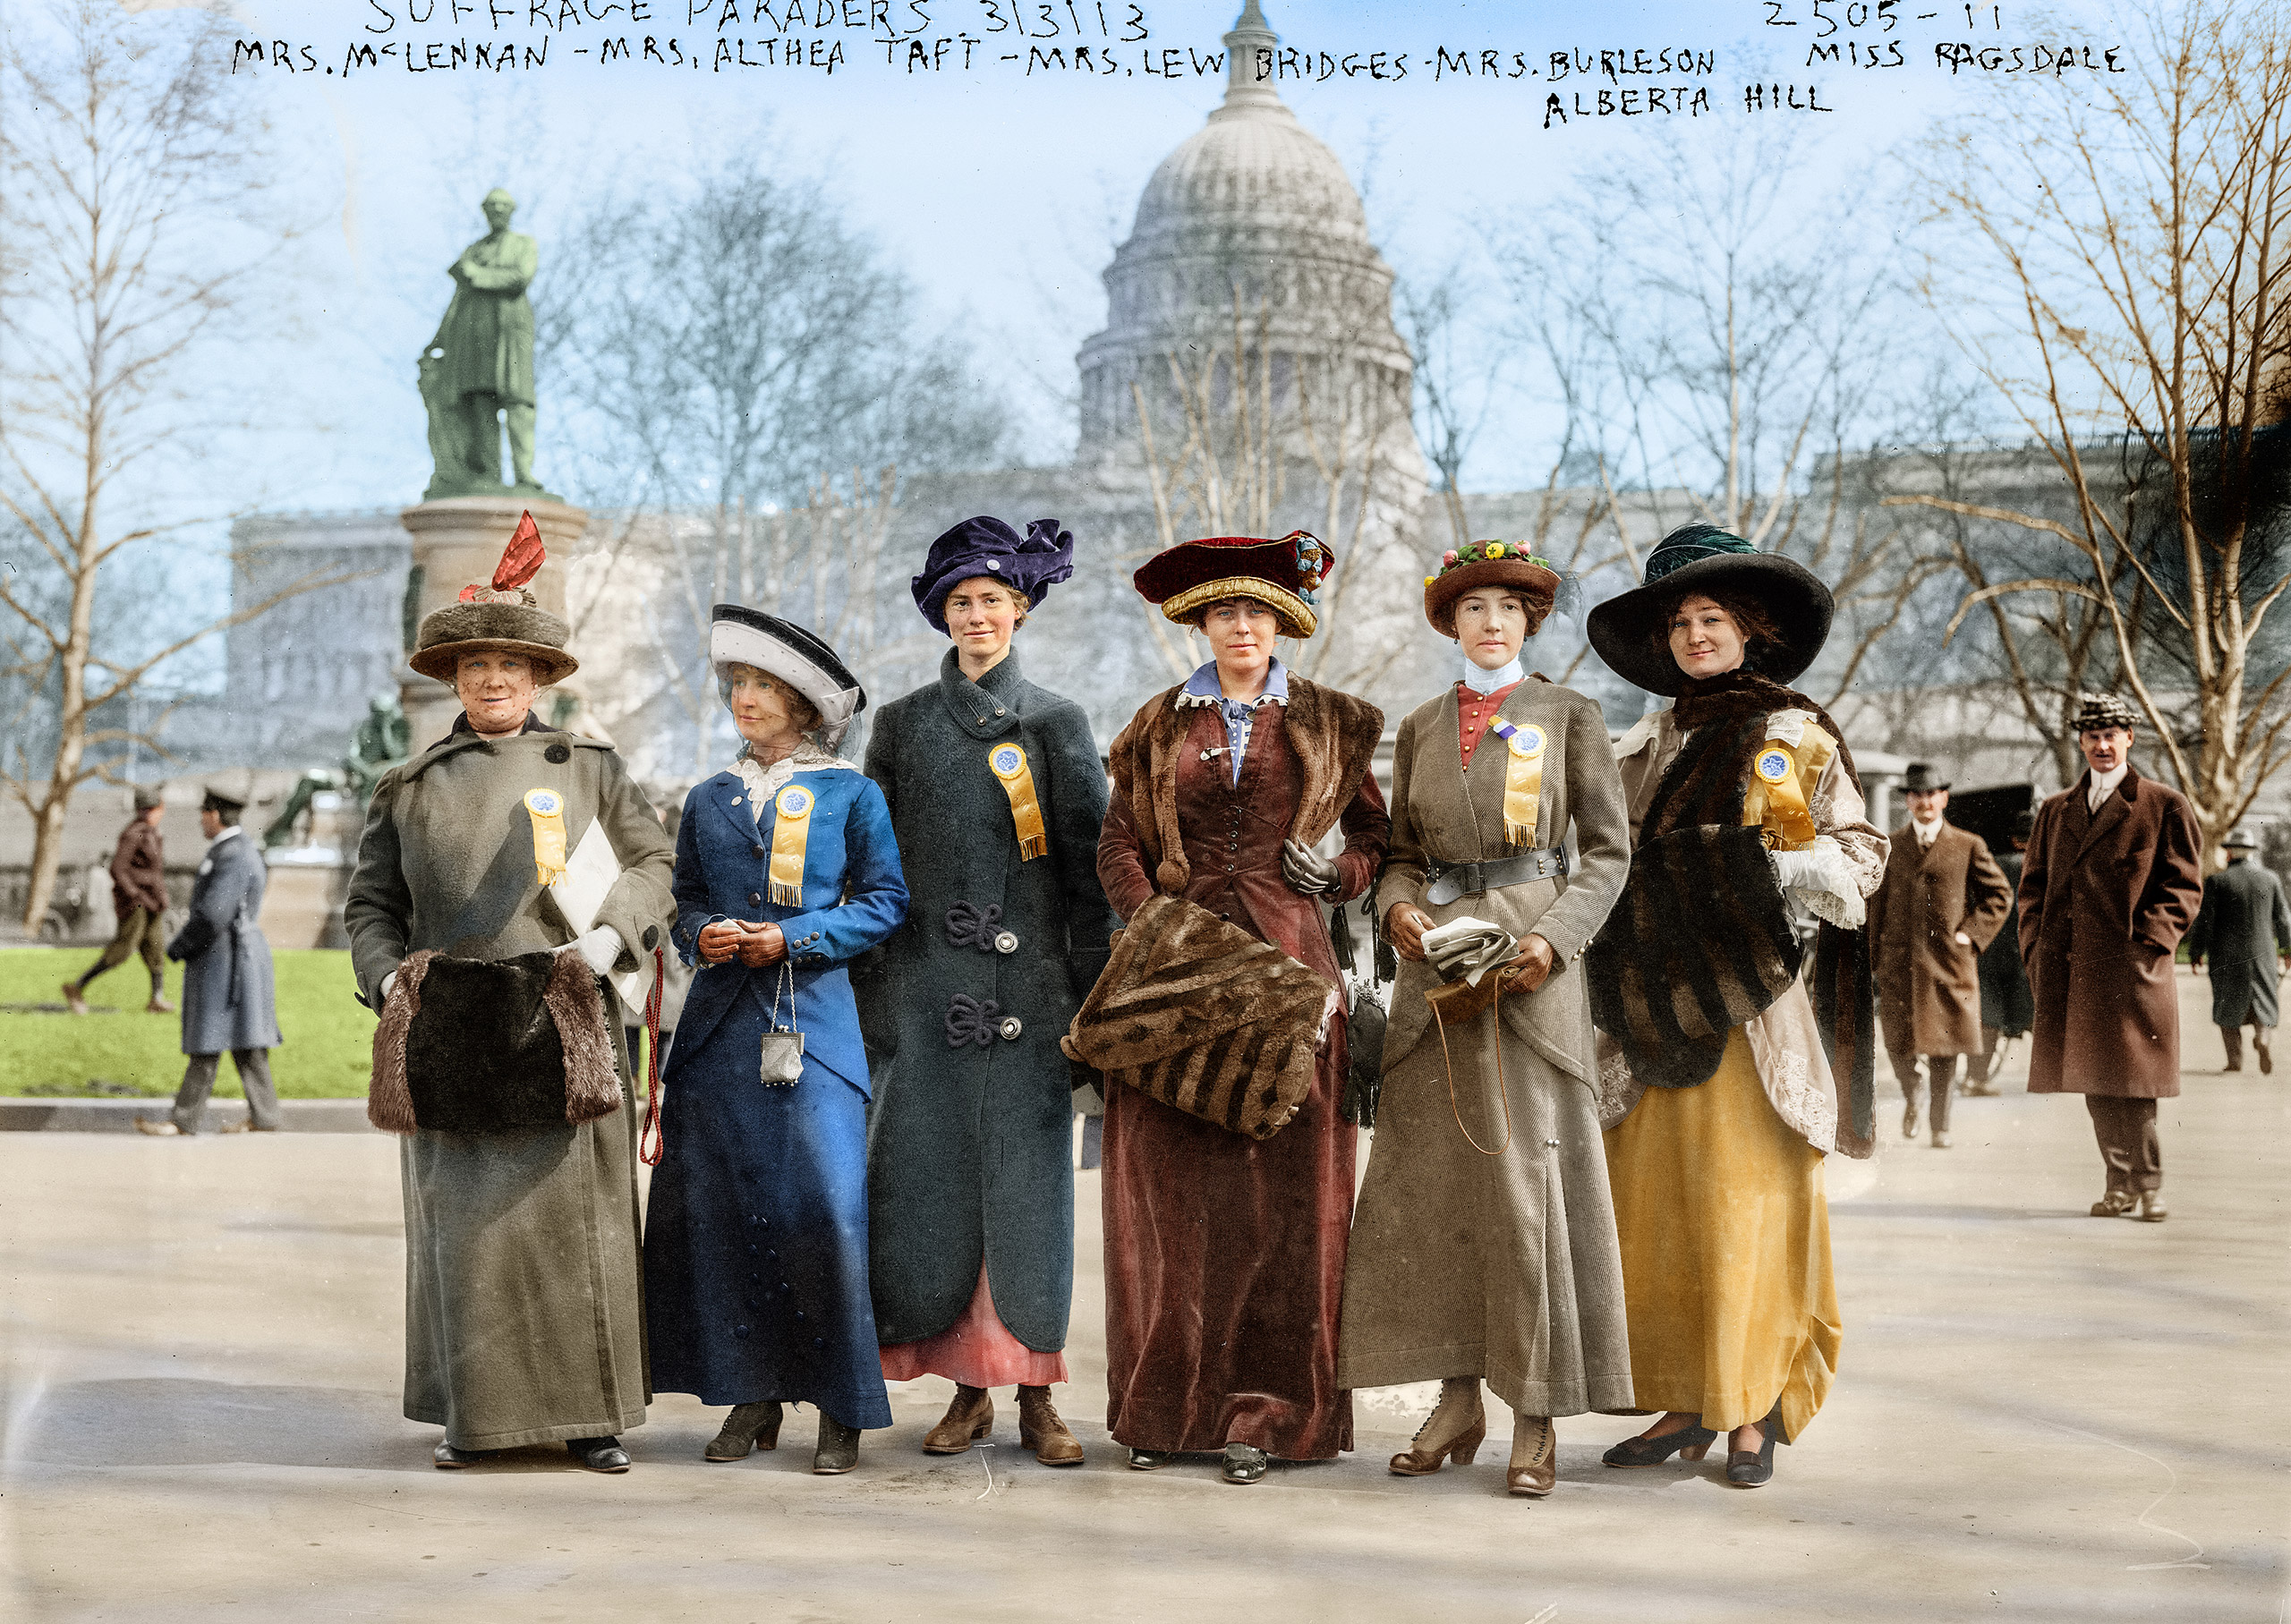 National American Woman Suffrage Association parade held in Washington, D.C., Mar. 3, 1913 showing (left to right) Mrs. Russell McLennan, Mrs. Althea Taft, Mrs. Lew Bridges, Mrs. Richard Coke Burleson, Alberta Hill and Miss F. Ragsdale.